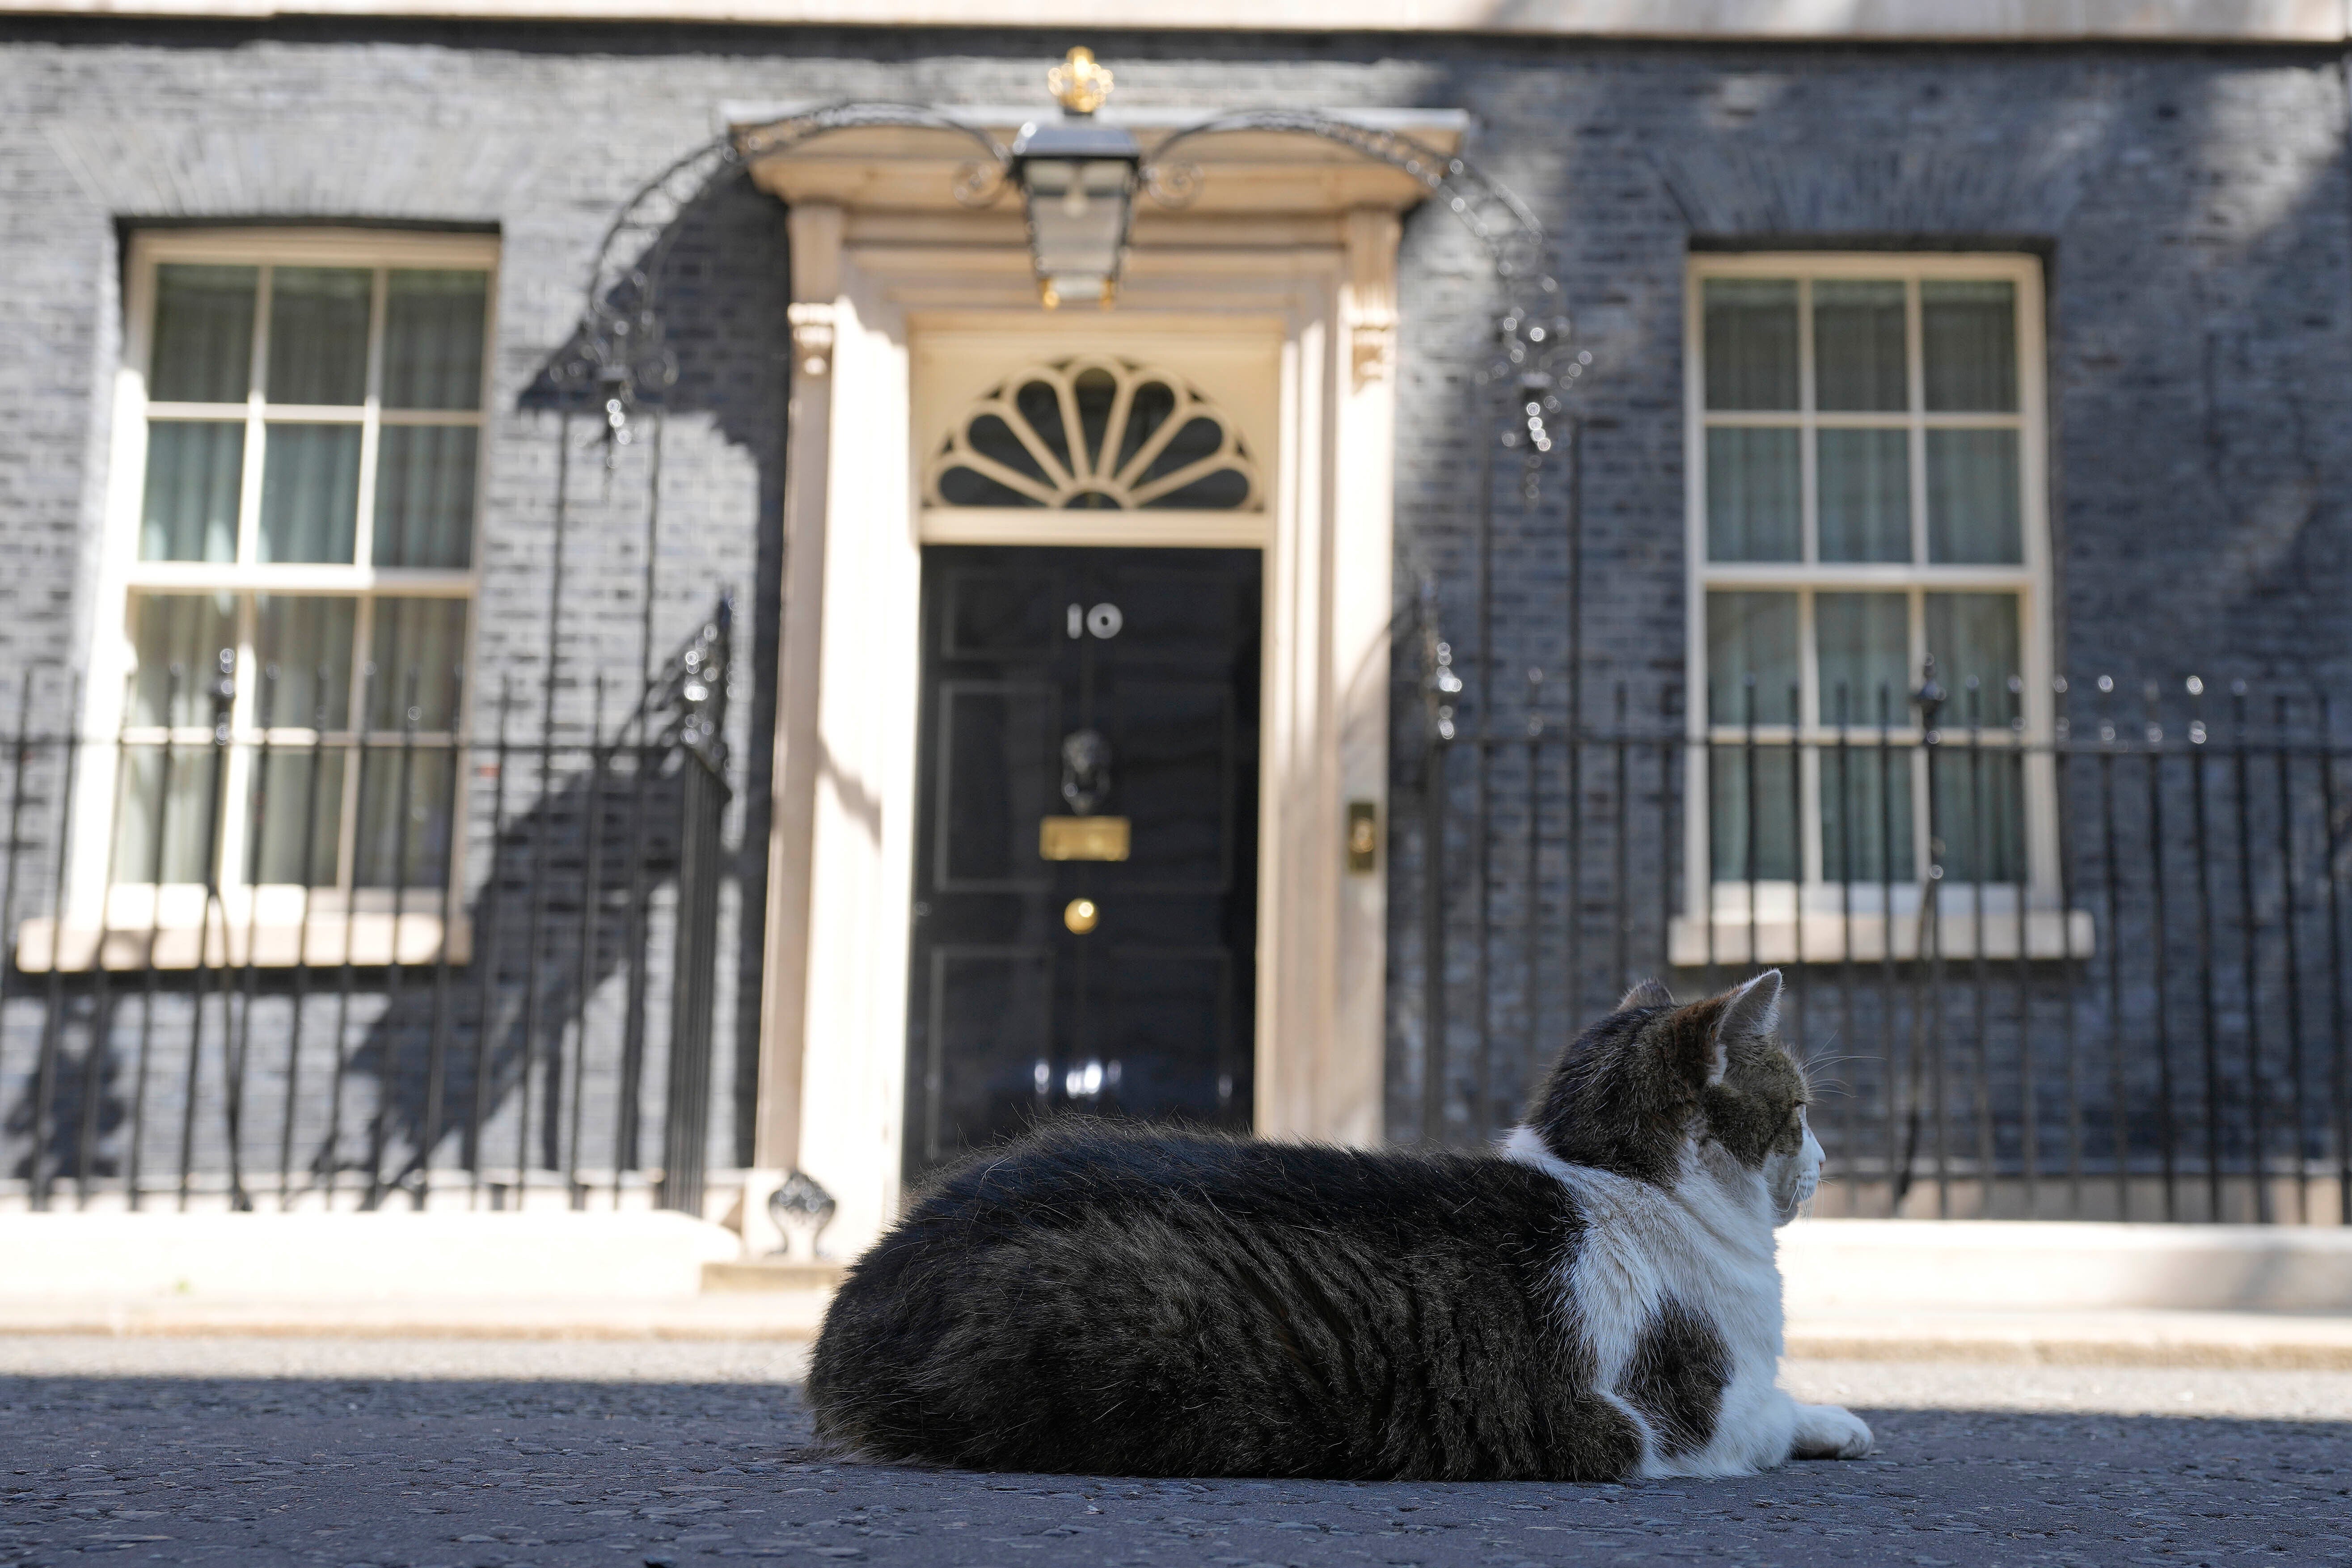 Larry is too busy to help the next prime minister